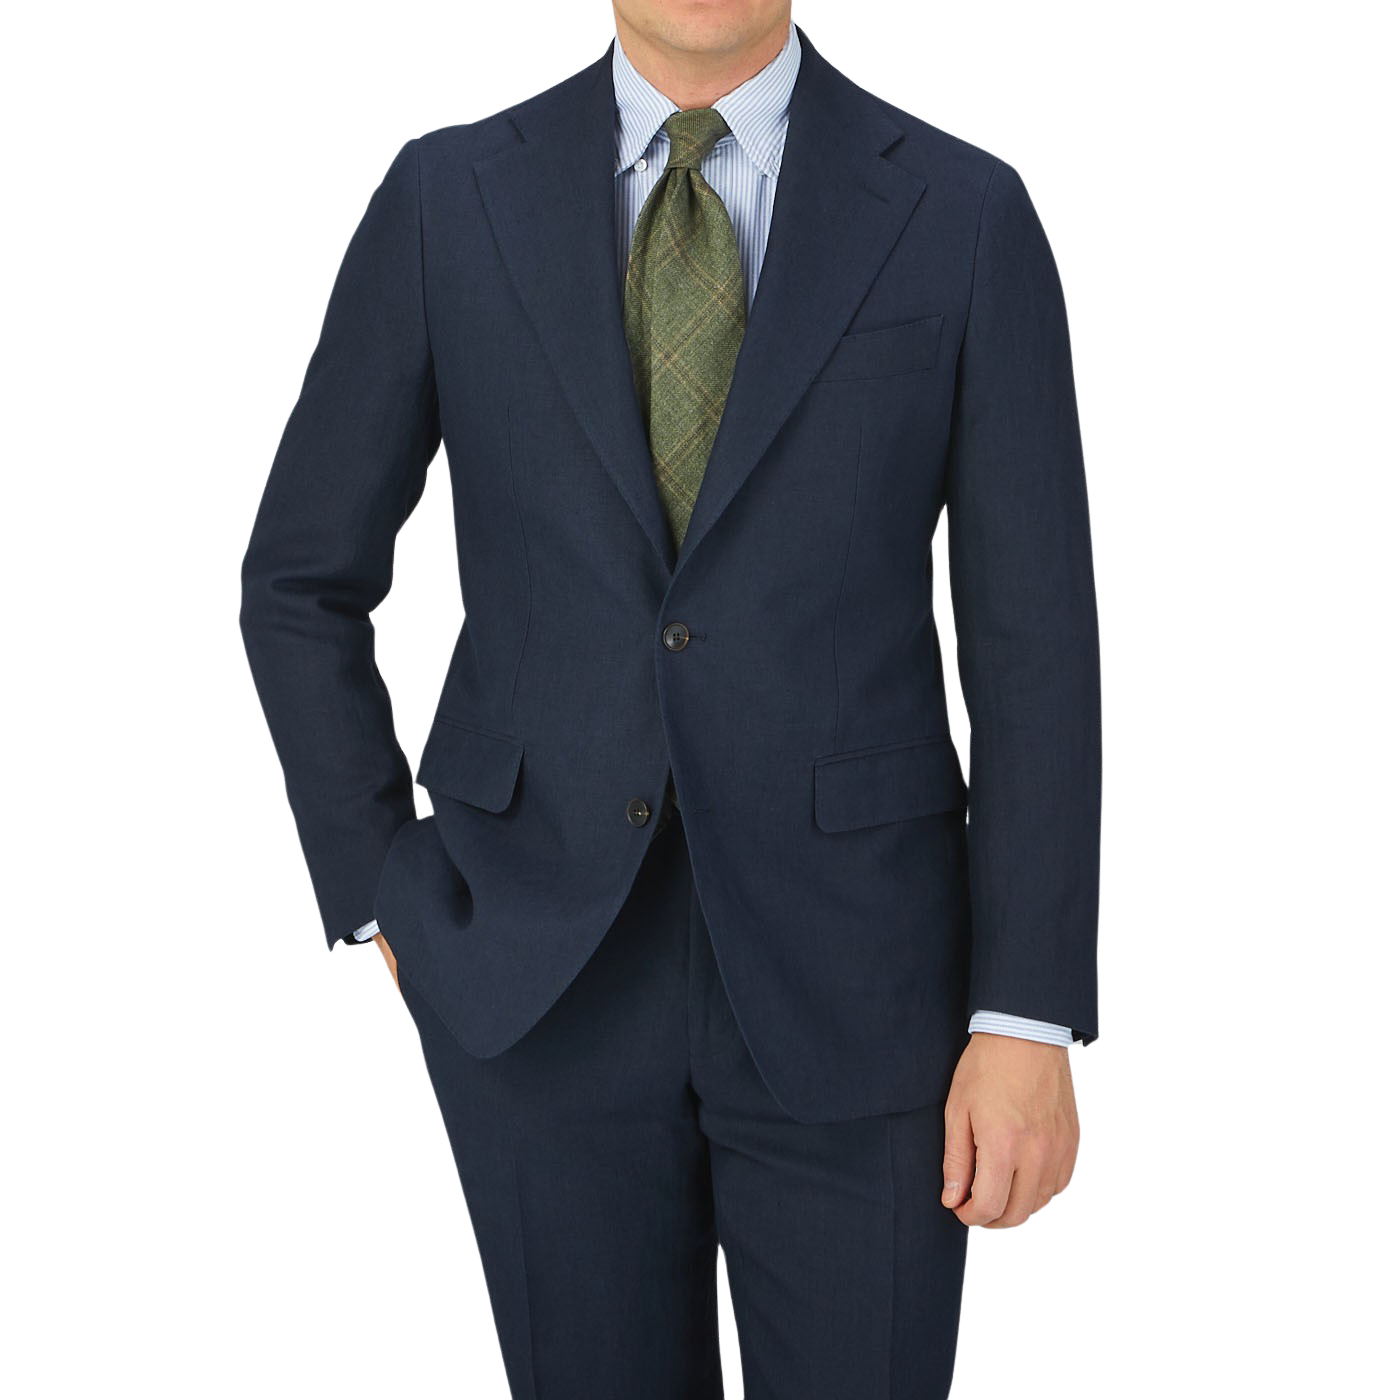 A man in a tailored Baltzar Sartorial Navy Blue Pure Linen Suit Jacket posing for a photo, wearing linen fabric trousers.